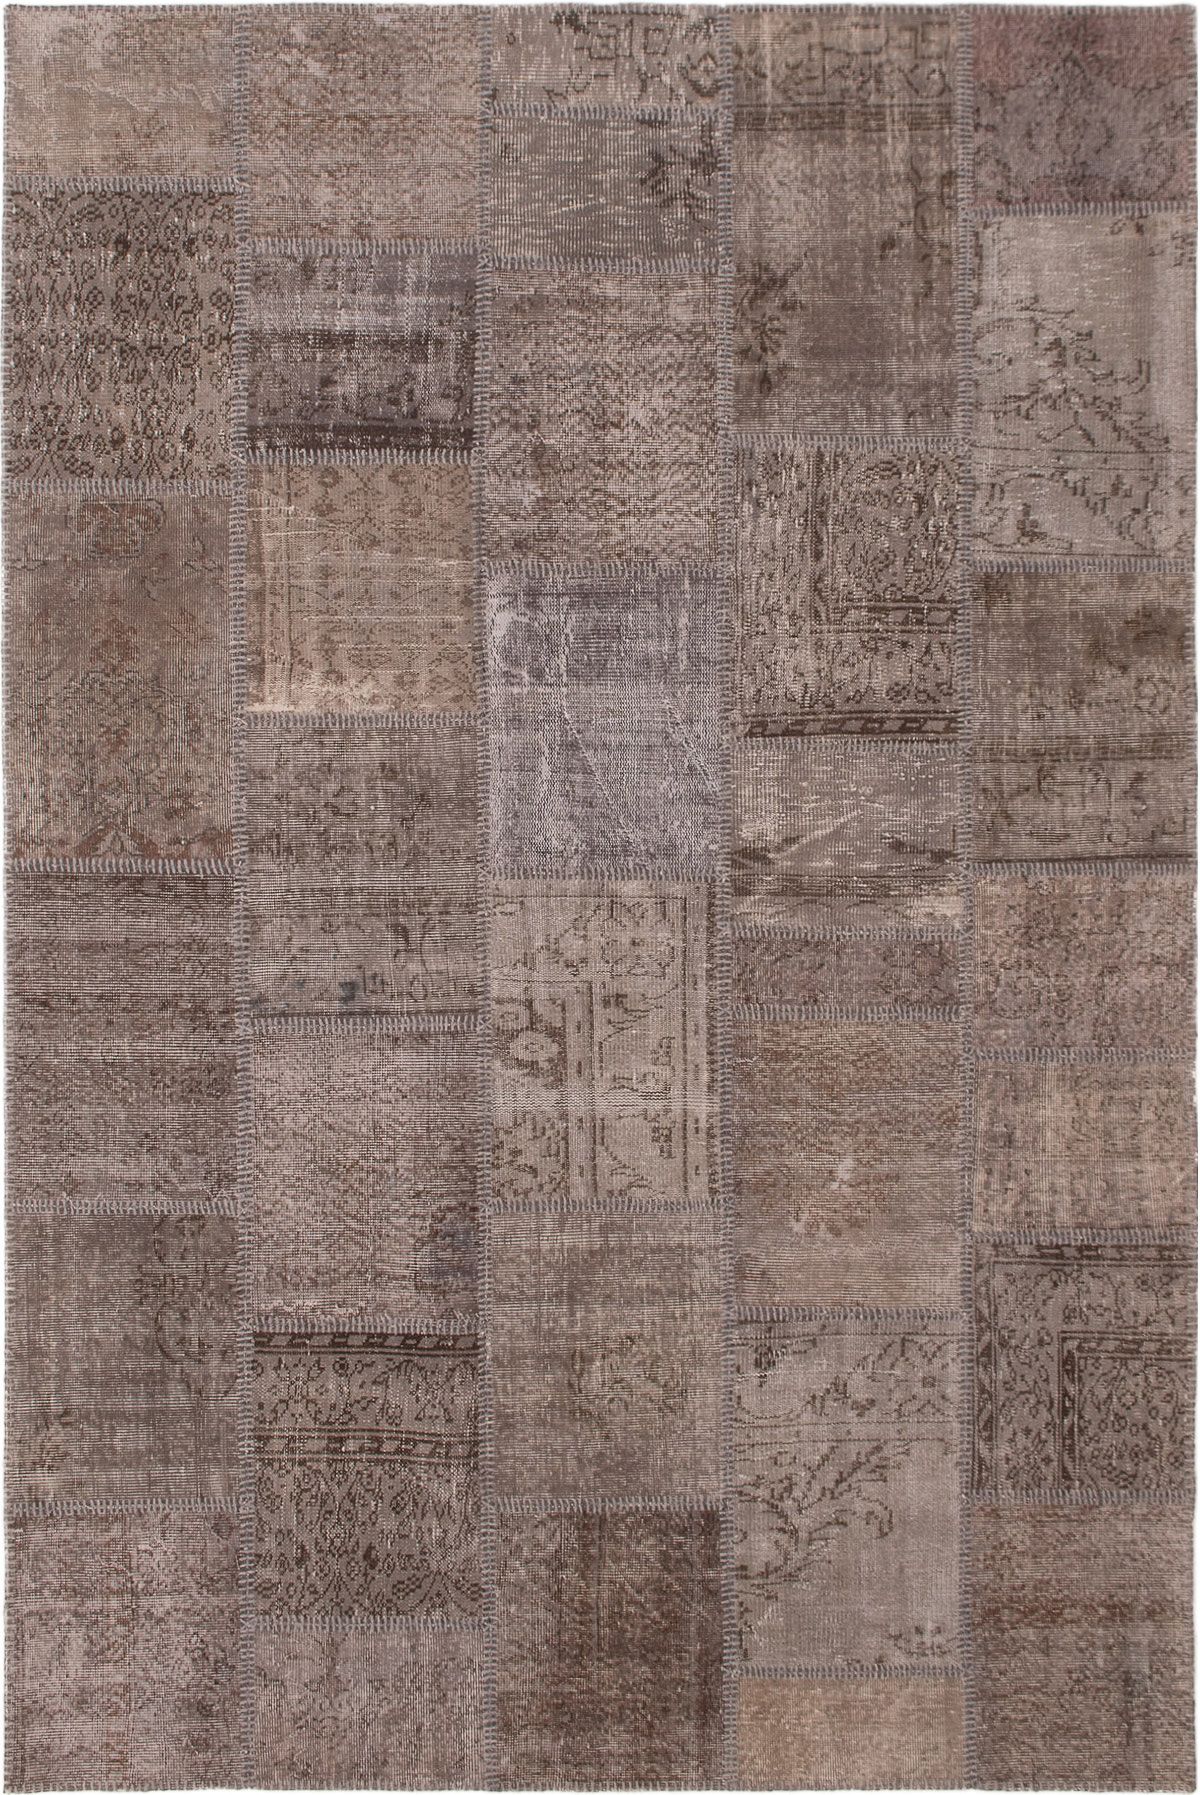 Hand-knotted Color Transition Patch Grey Wool Rug 6'7" x 9'10"  Size: 6'7" x 9'10"  